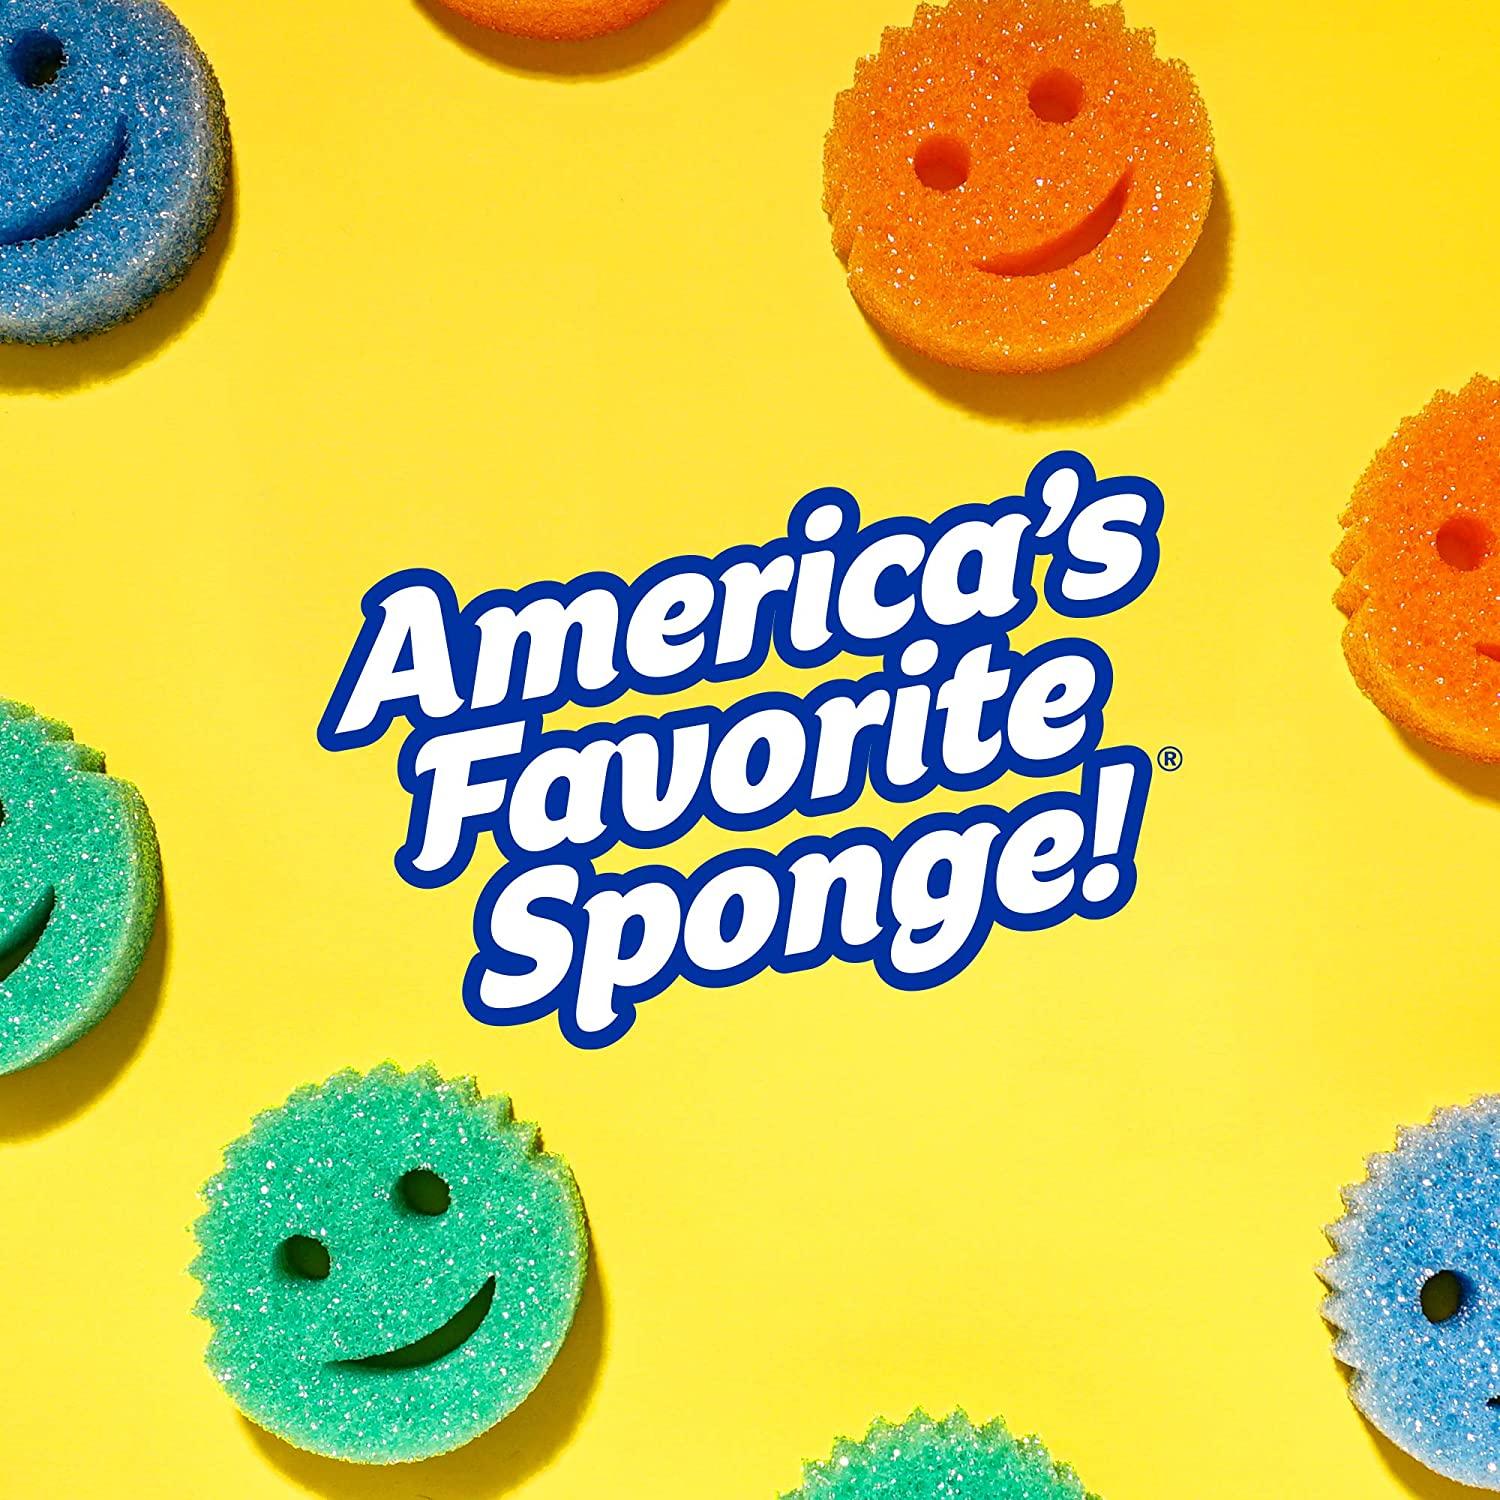 $3/mo - Finance Scrub Daddy Dual Sided Sponge and Scrubber - Scrub Mommy -  Scratch Free Sponge for Dishes and Home, Soft in Warm Water, Firm in Cold,  Odor Resistant, Deep Cleaning